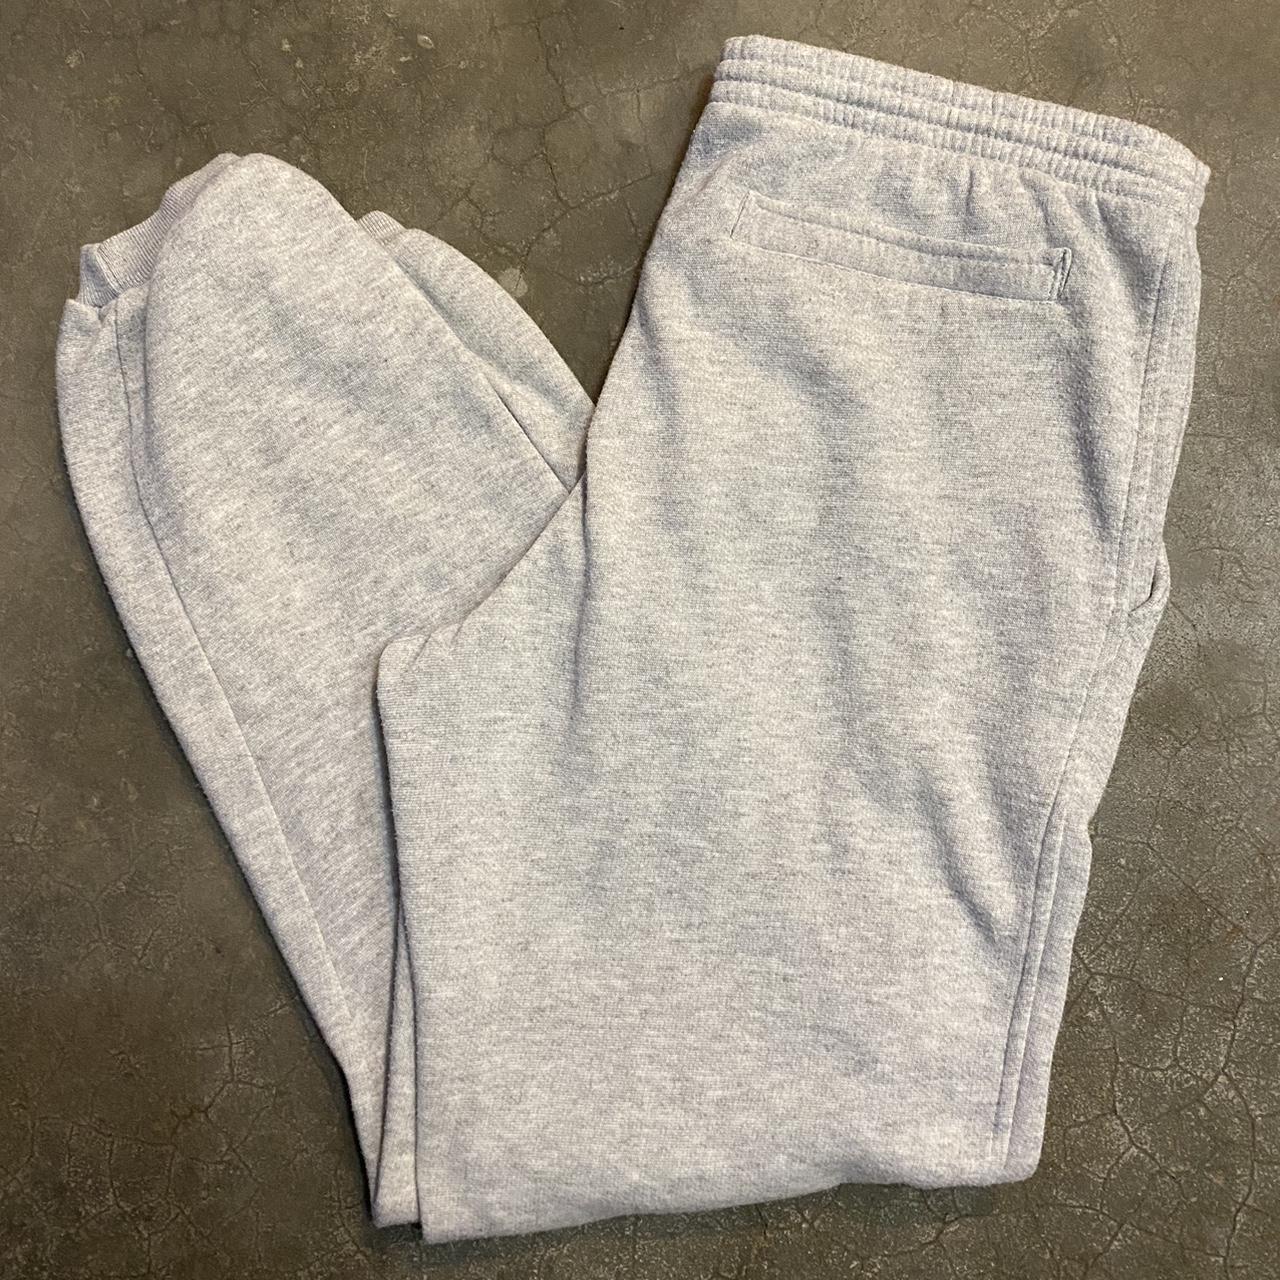 Christian Dior Men's Grey and White Joggers-tracksuits | Depop